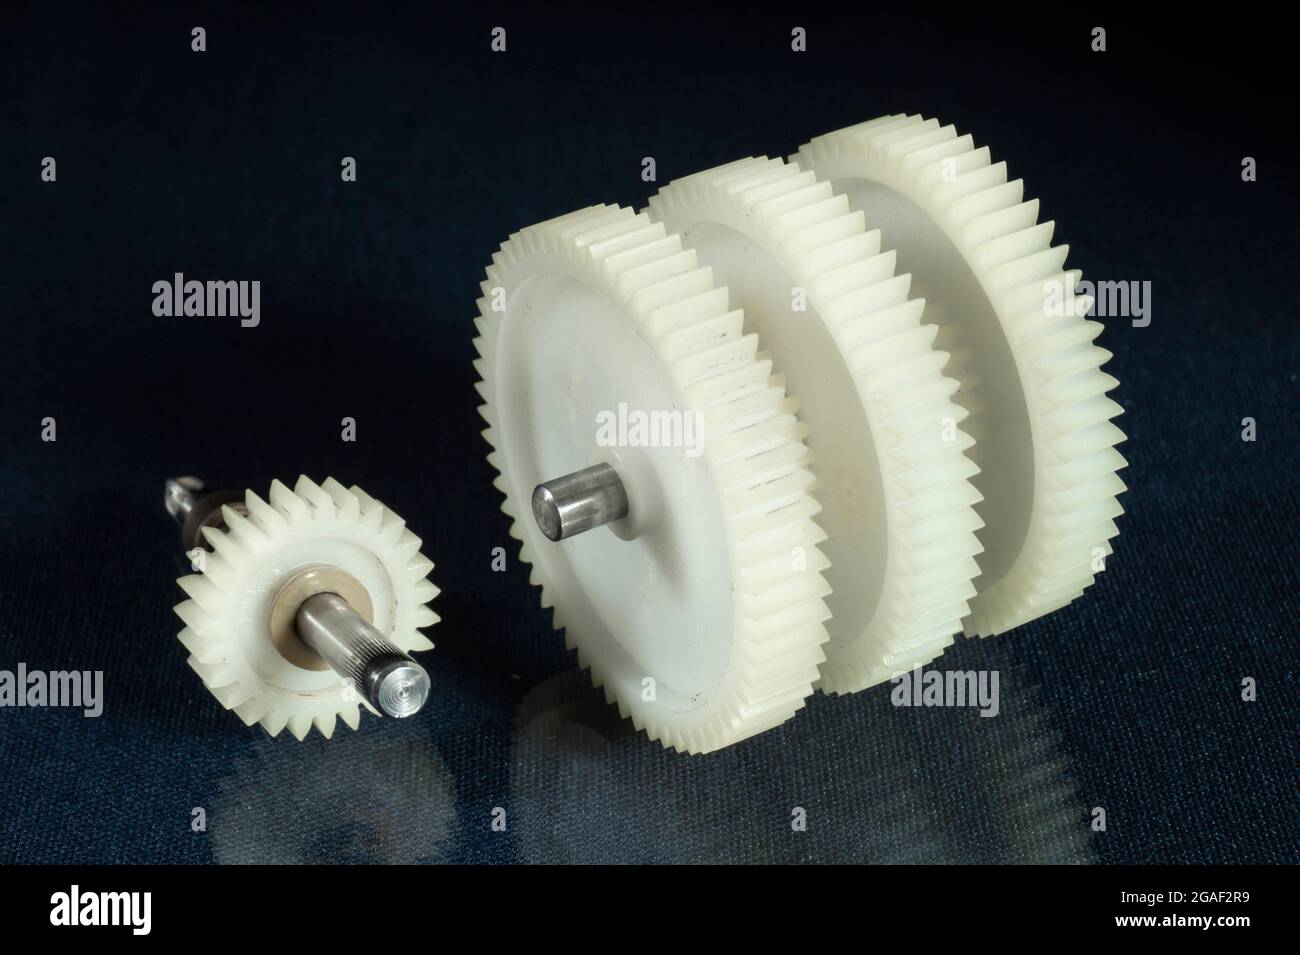 A white plastic gear on a table with a reflection. Spare parts on a black background Stock Photo